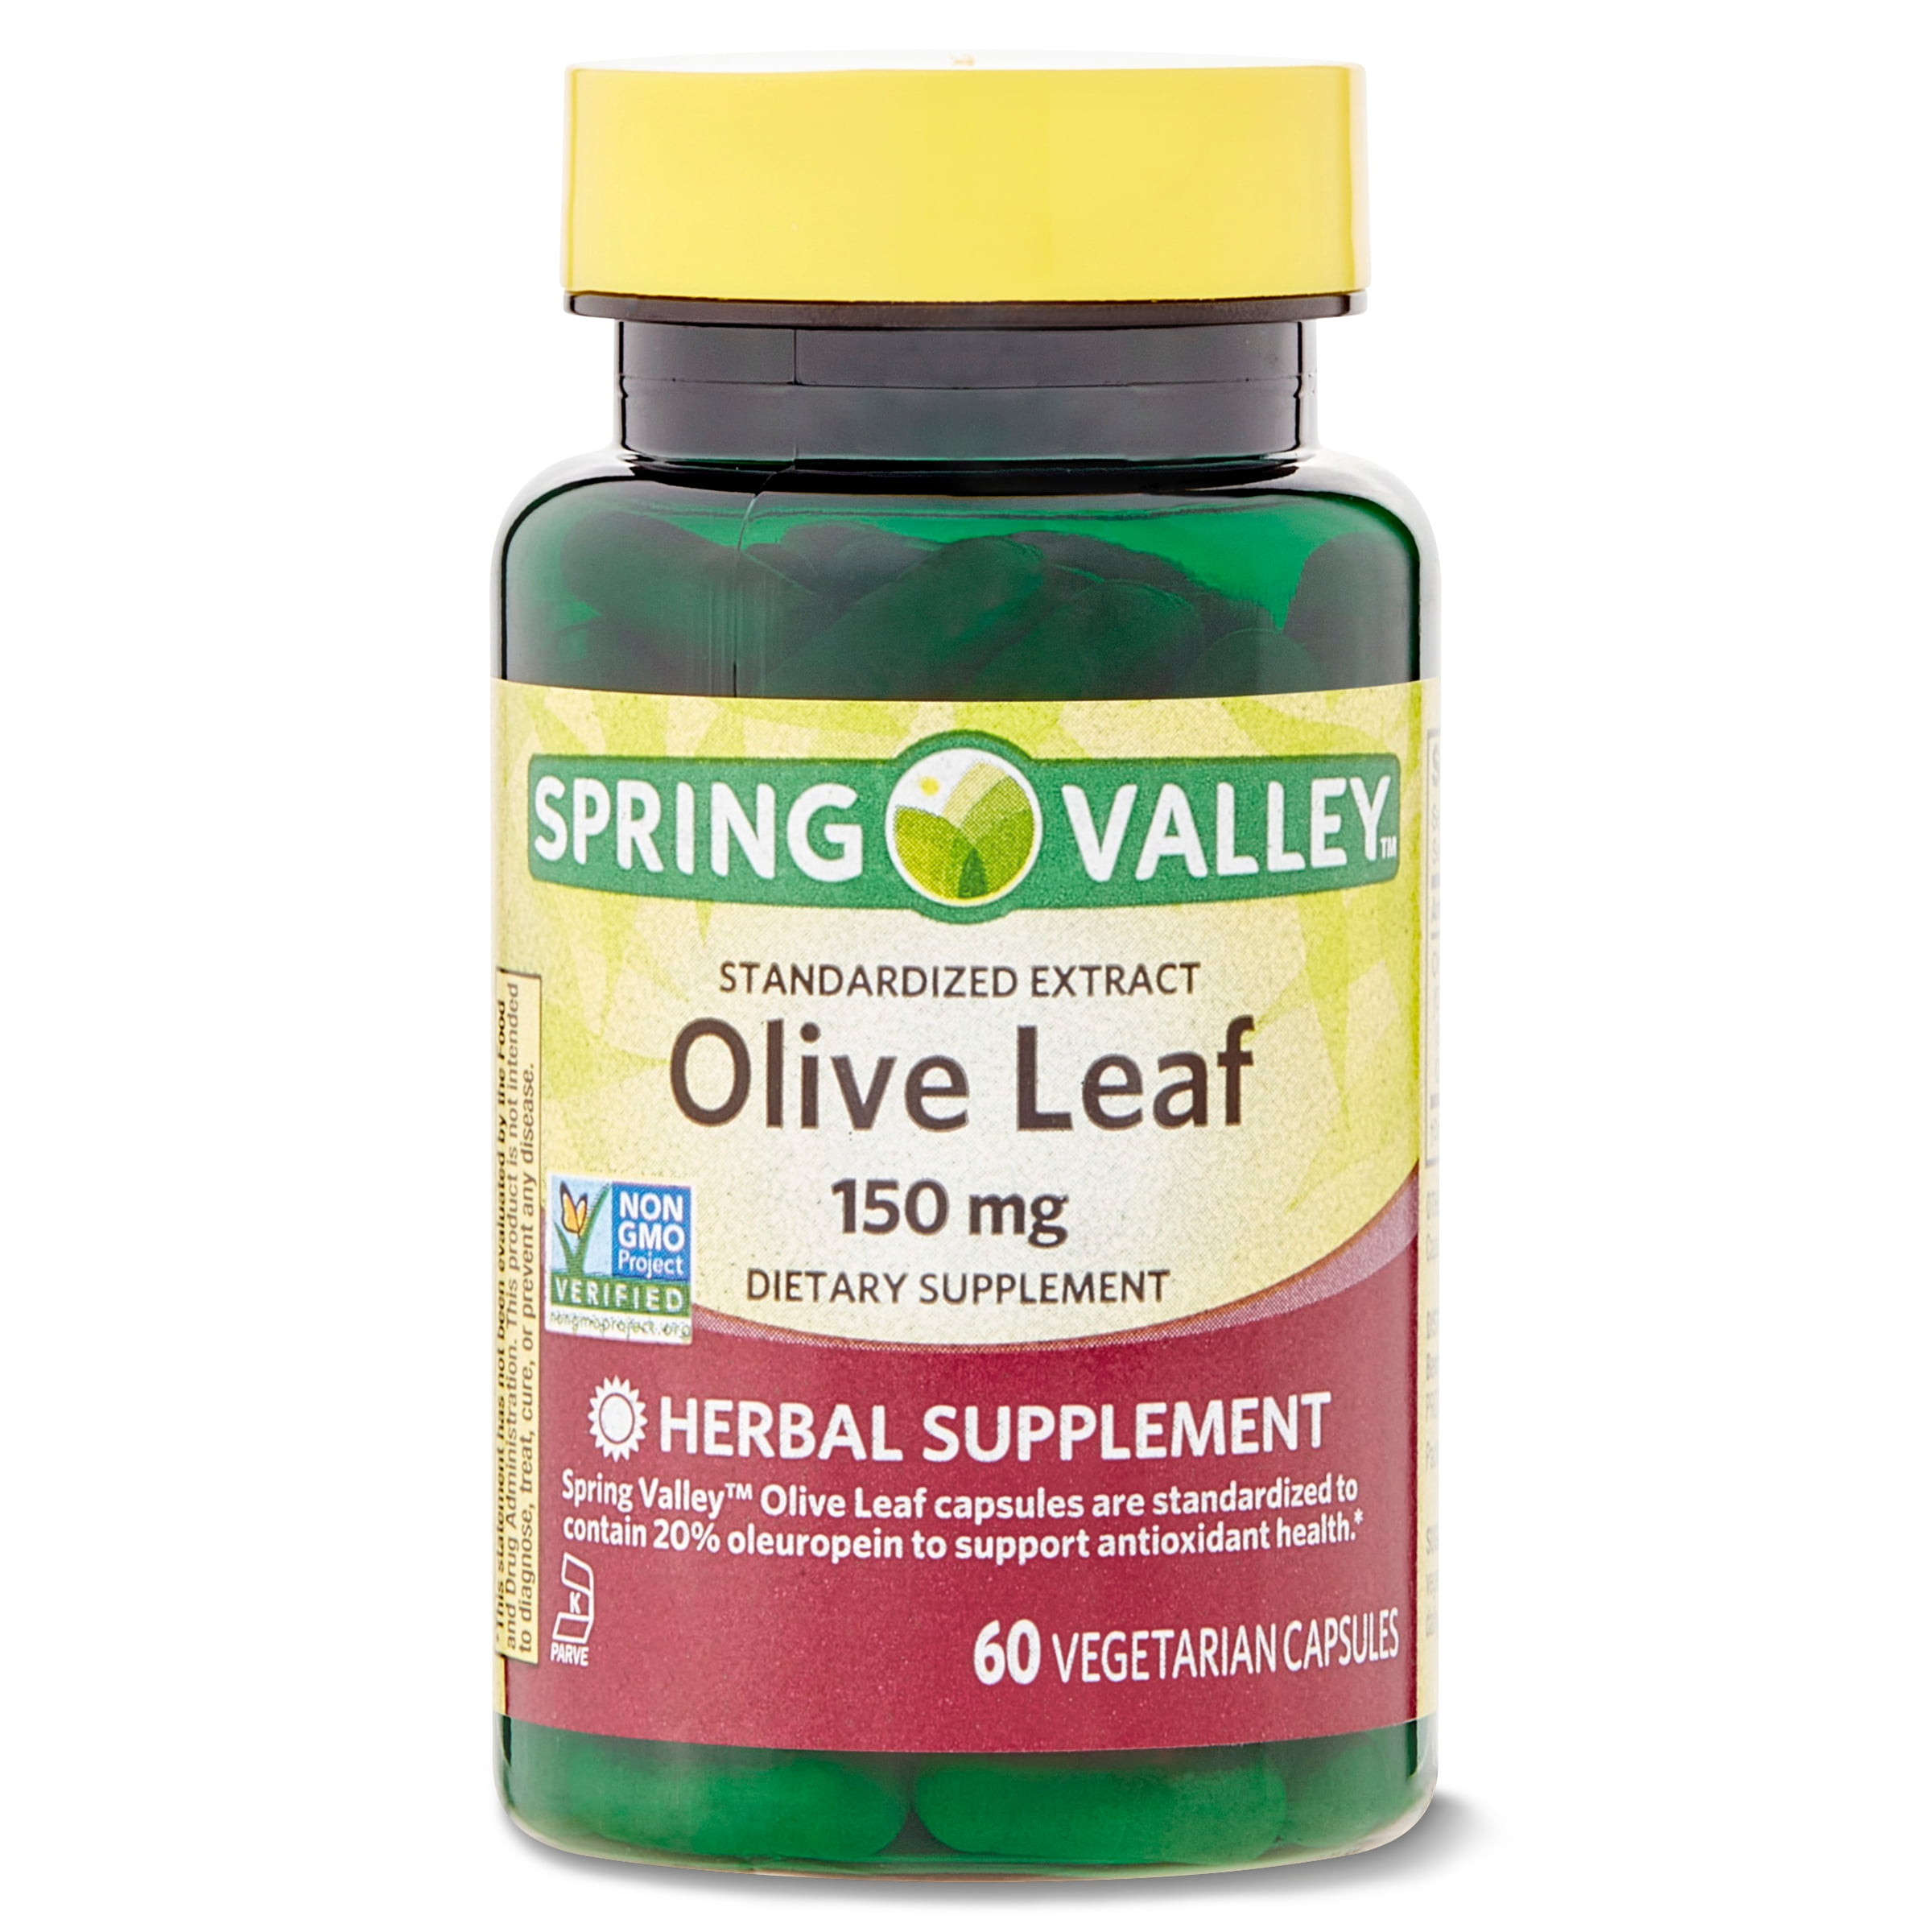 Spring Valley Standardized Extract Olive Leaf, Dietary Supplement, 150 mg,  60 Count Capsules